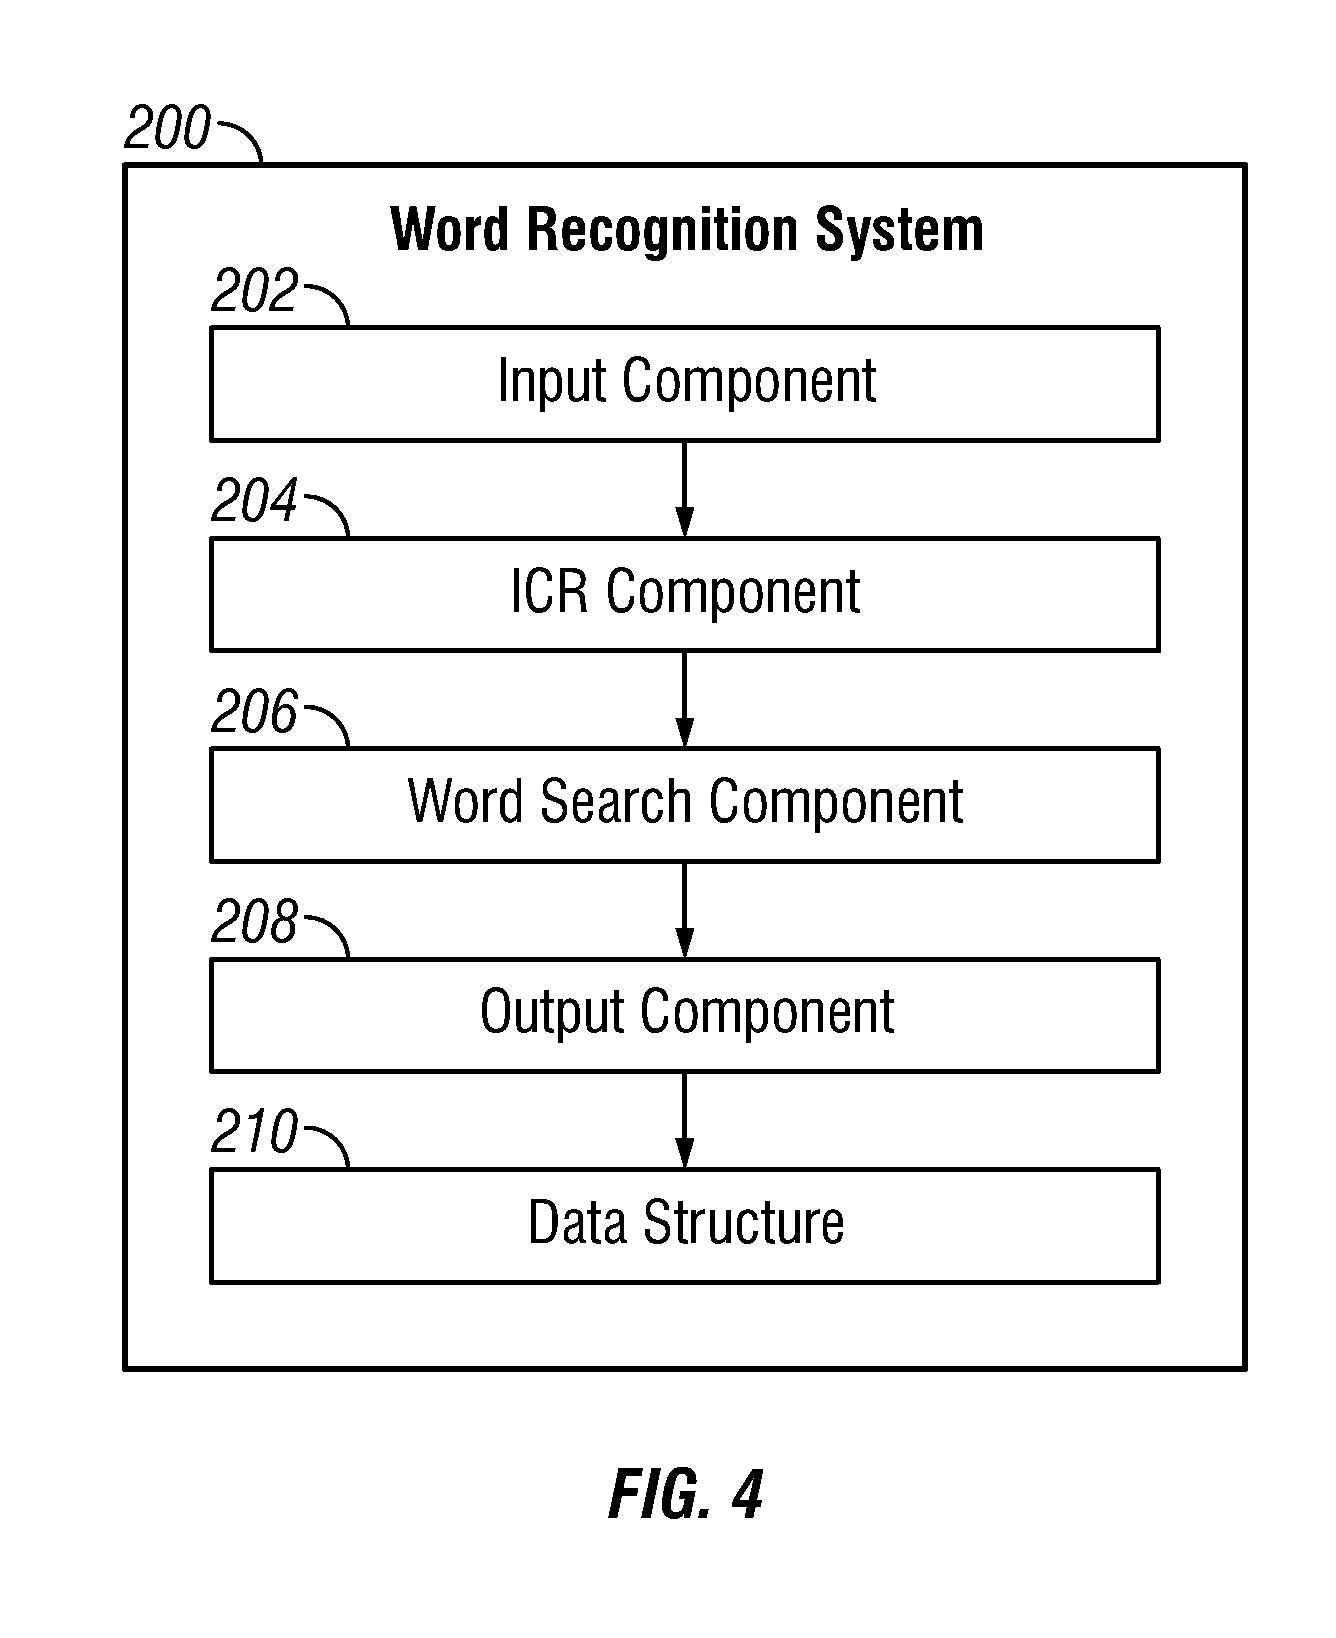 Word recognition of text undergoing an OCR process